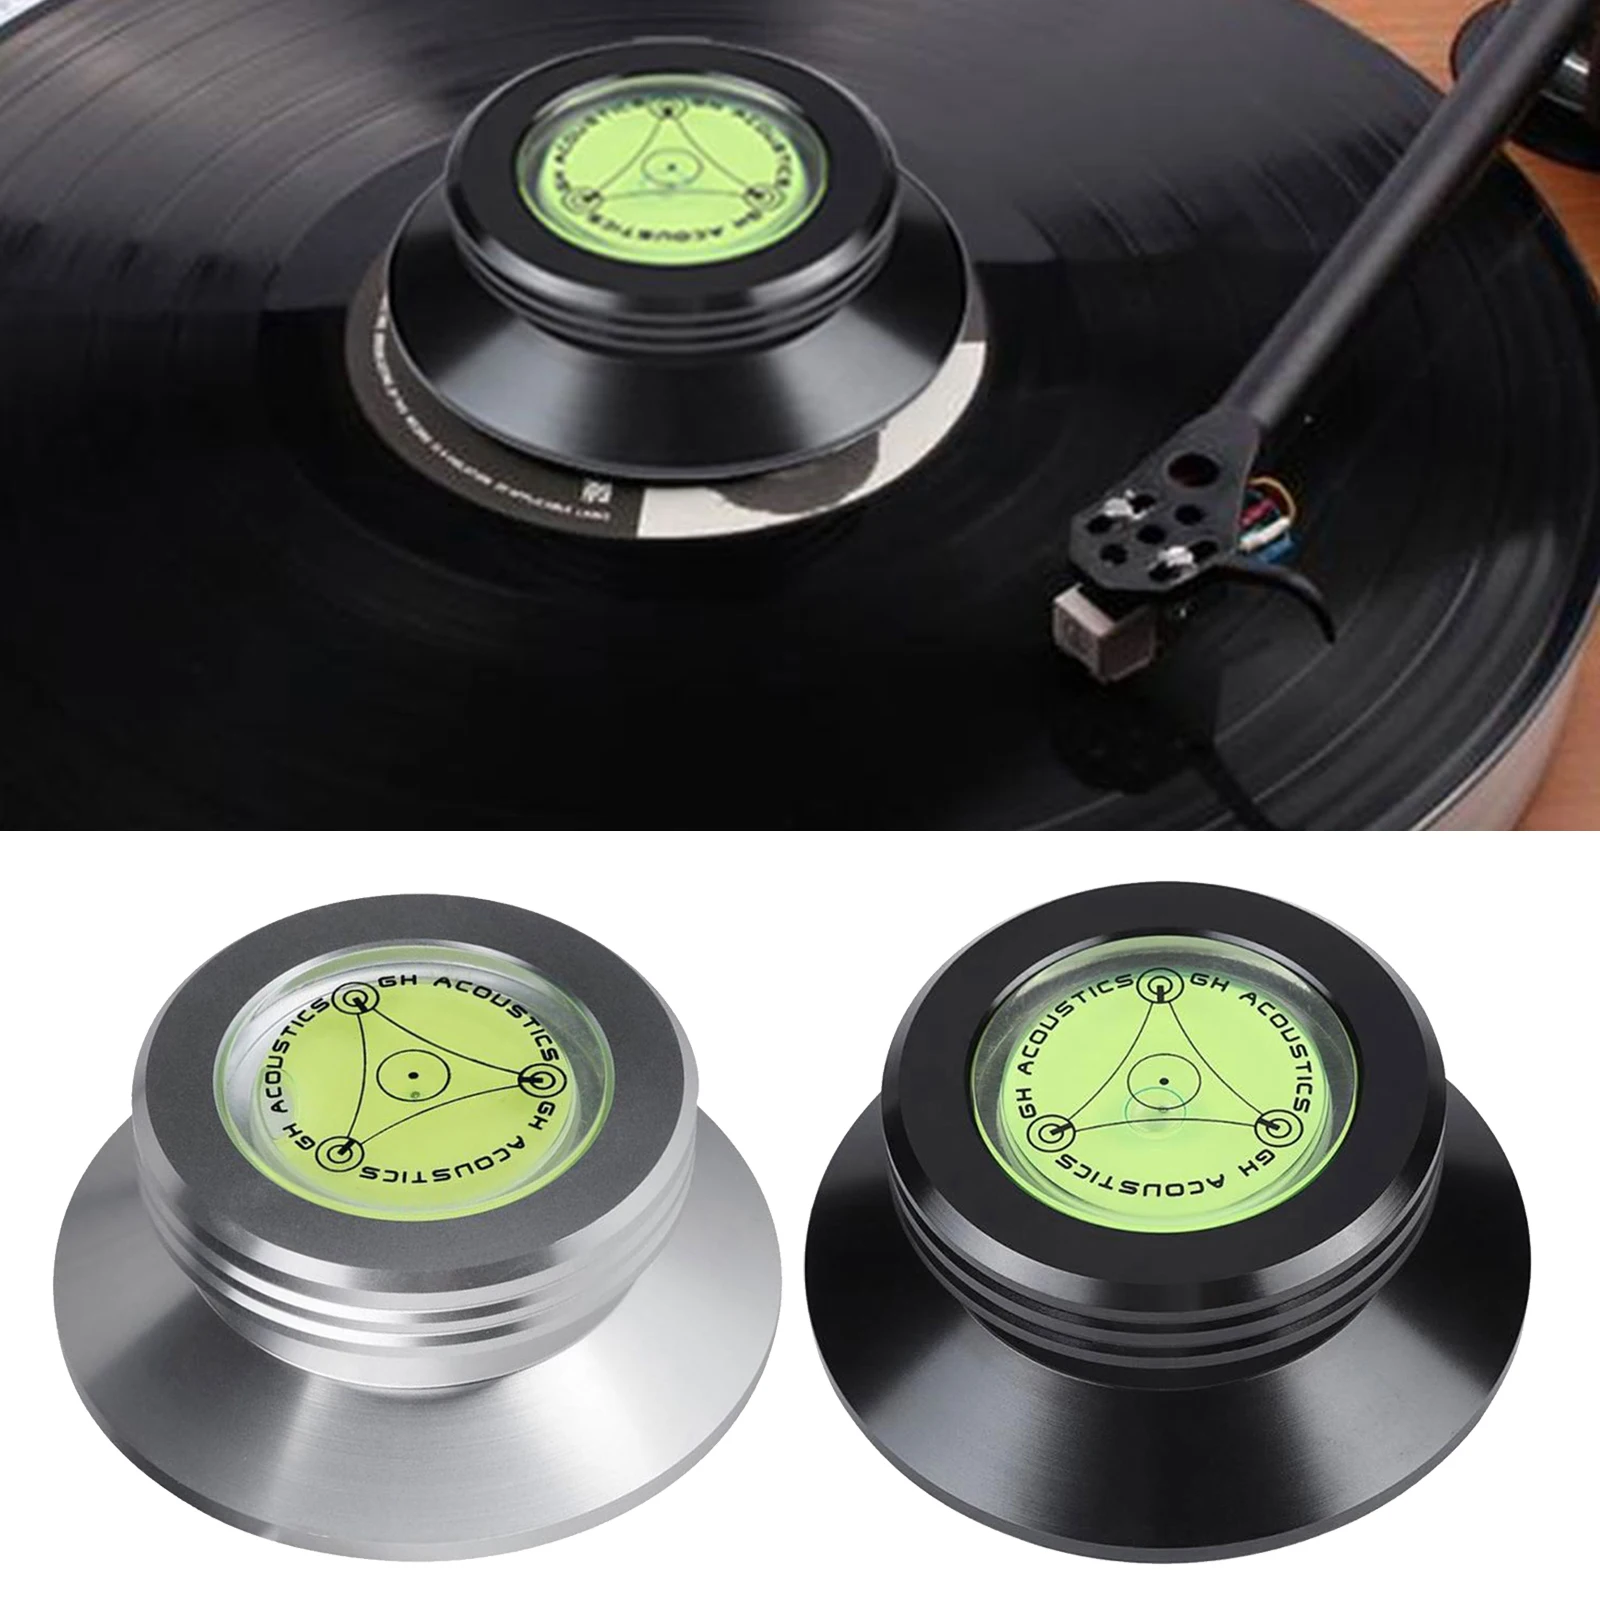 Adjustable Aluminum Alloy Turntable Disc Stabilizer Record Weight & Clamp for Phonograph